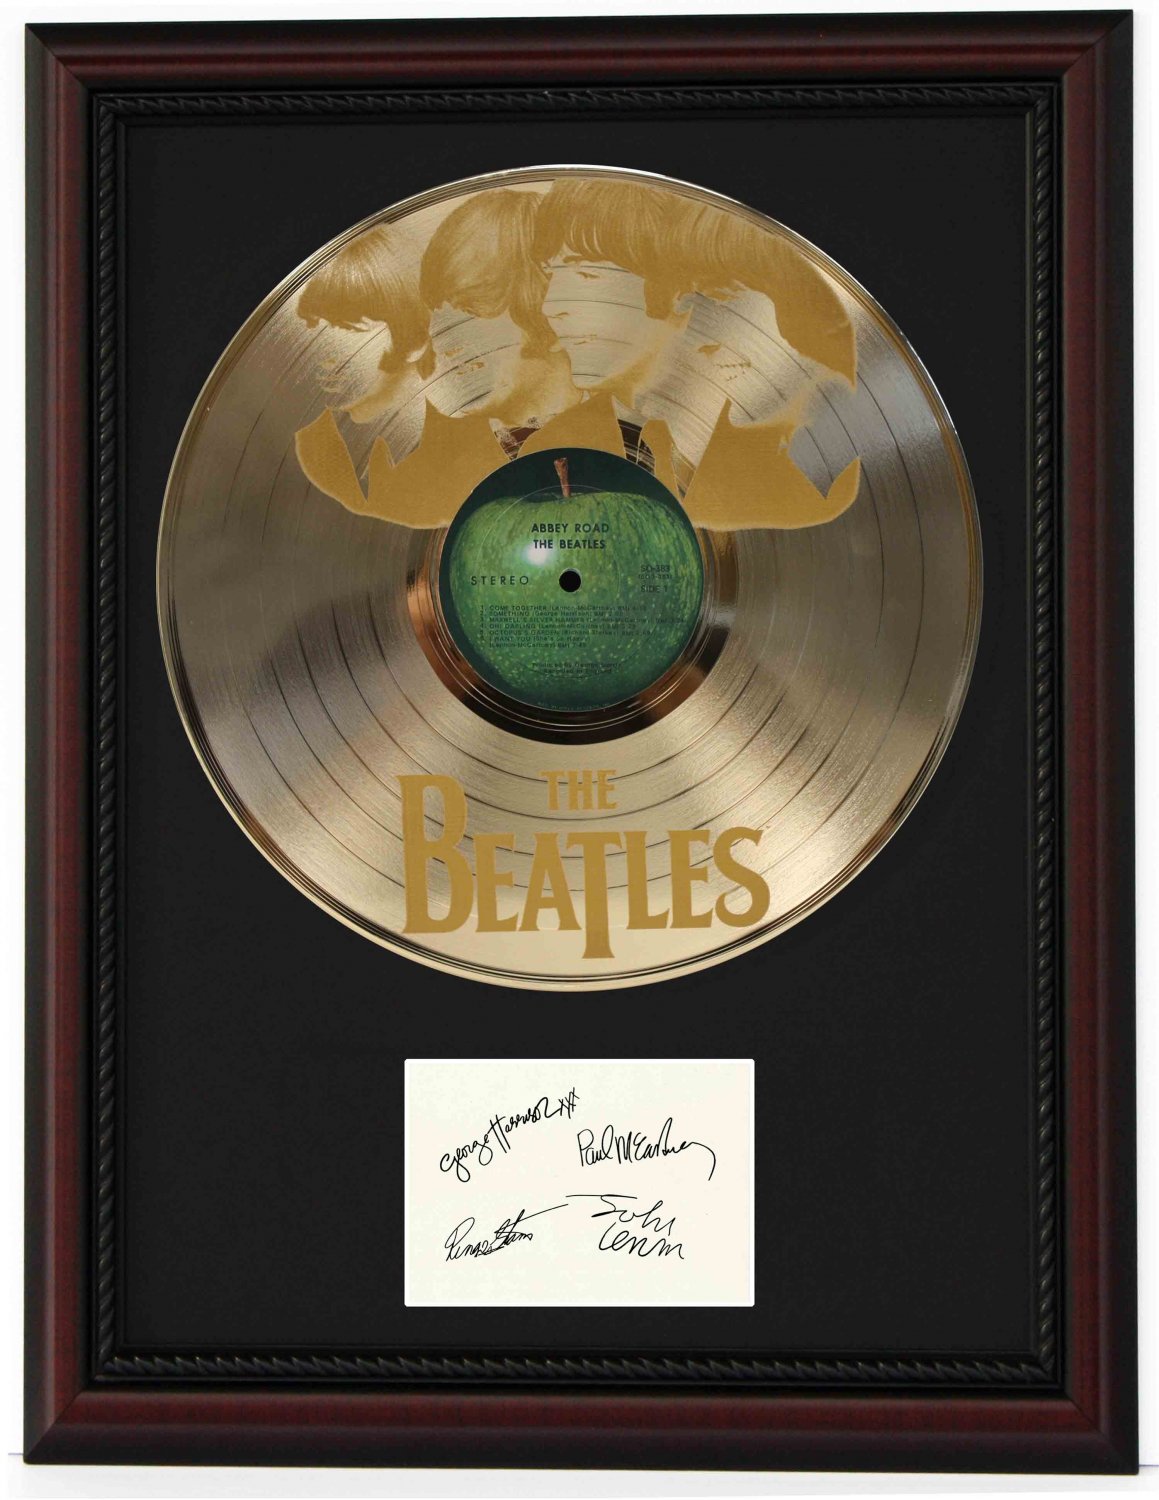 BEATLES "Abbey Road" Cherry Wood Gold LP Record Framed Etched Signature Display